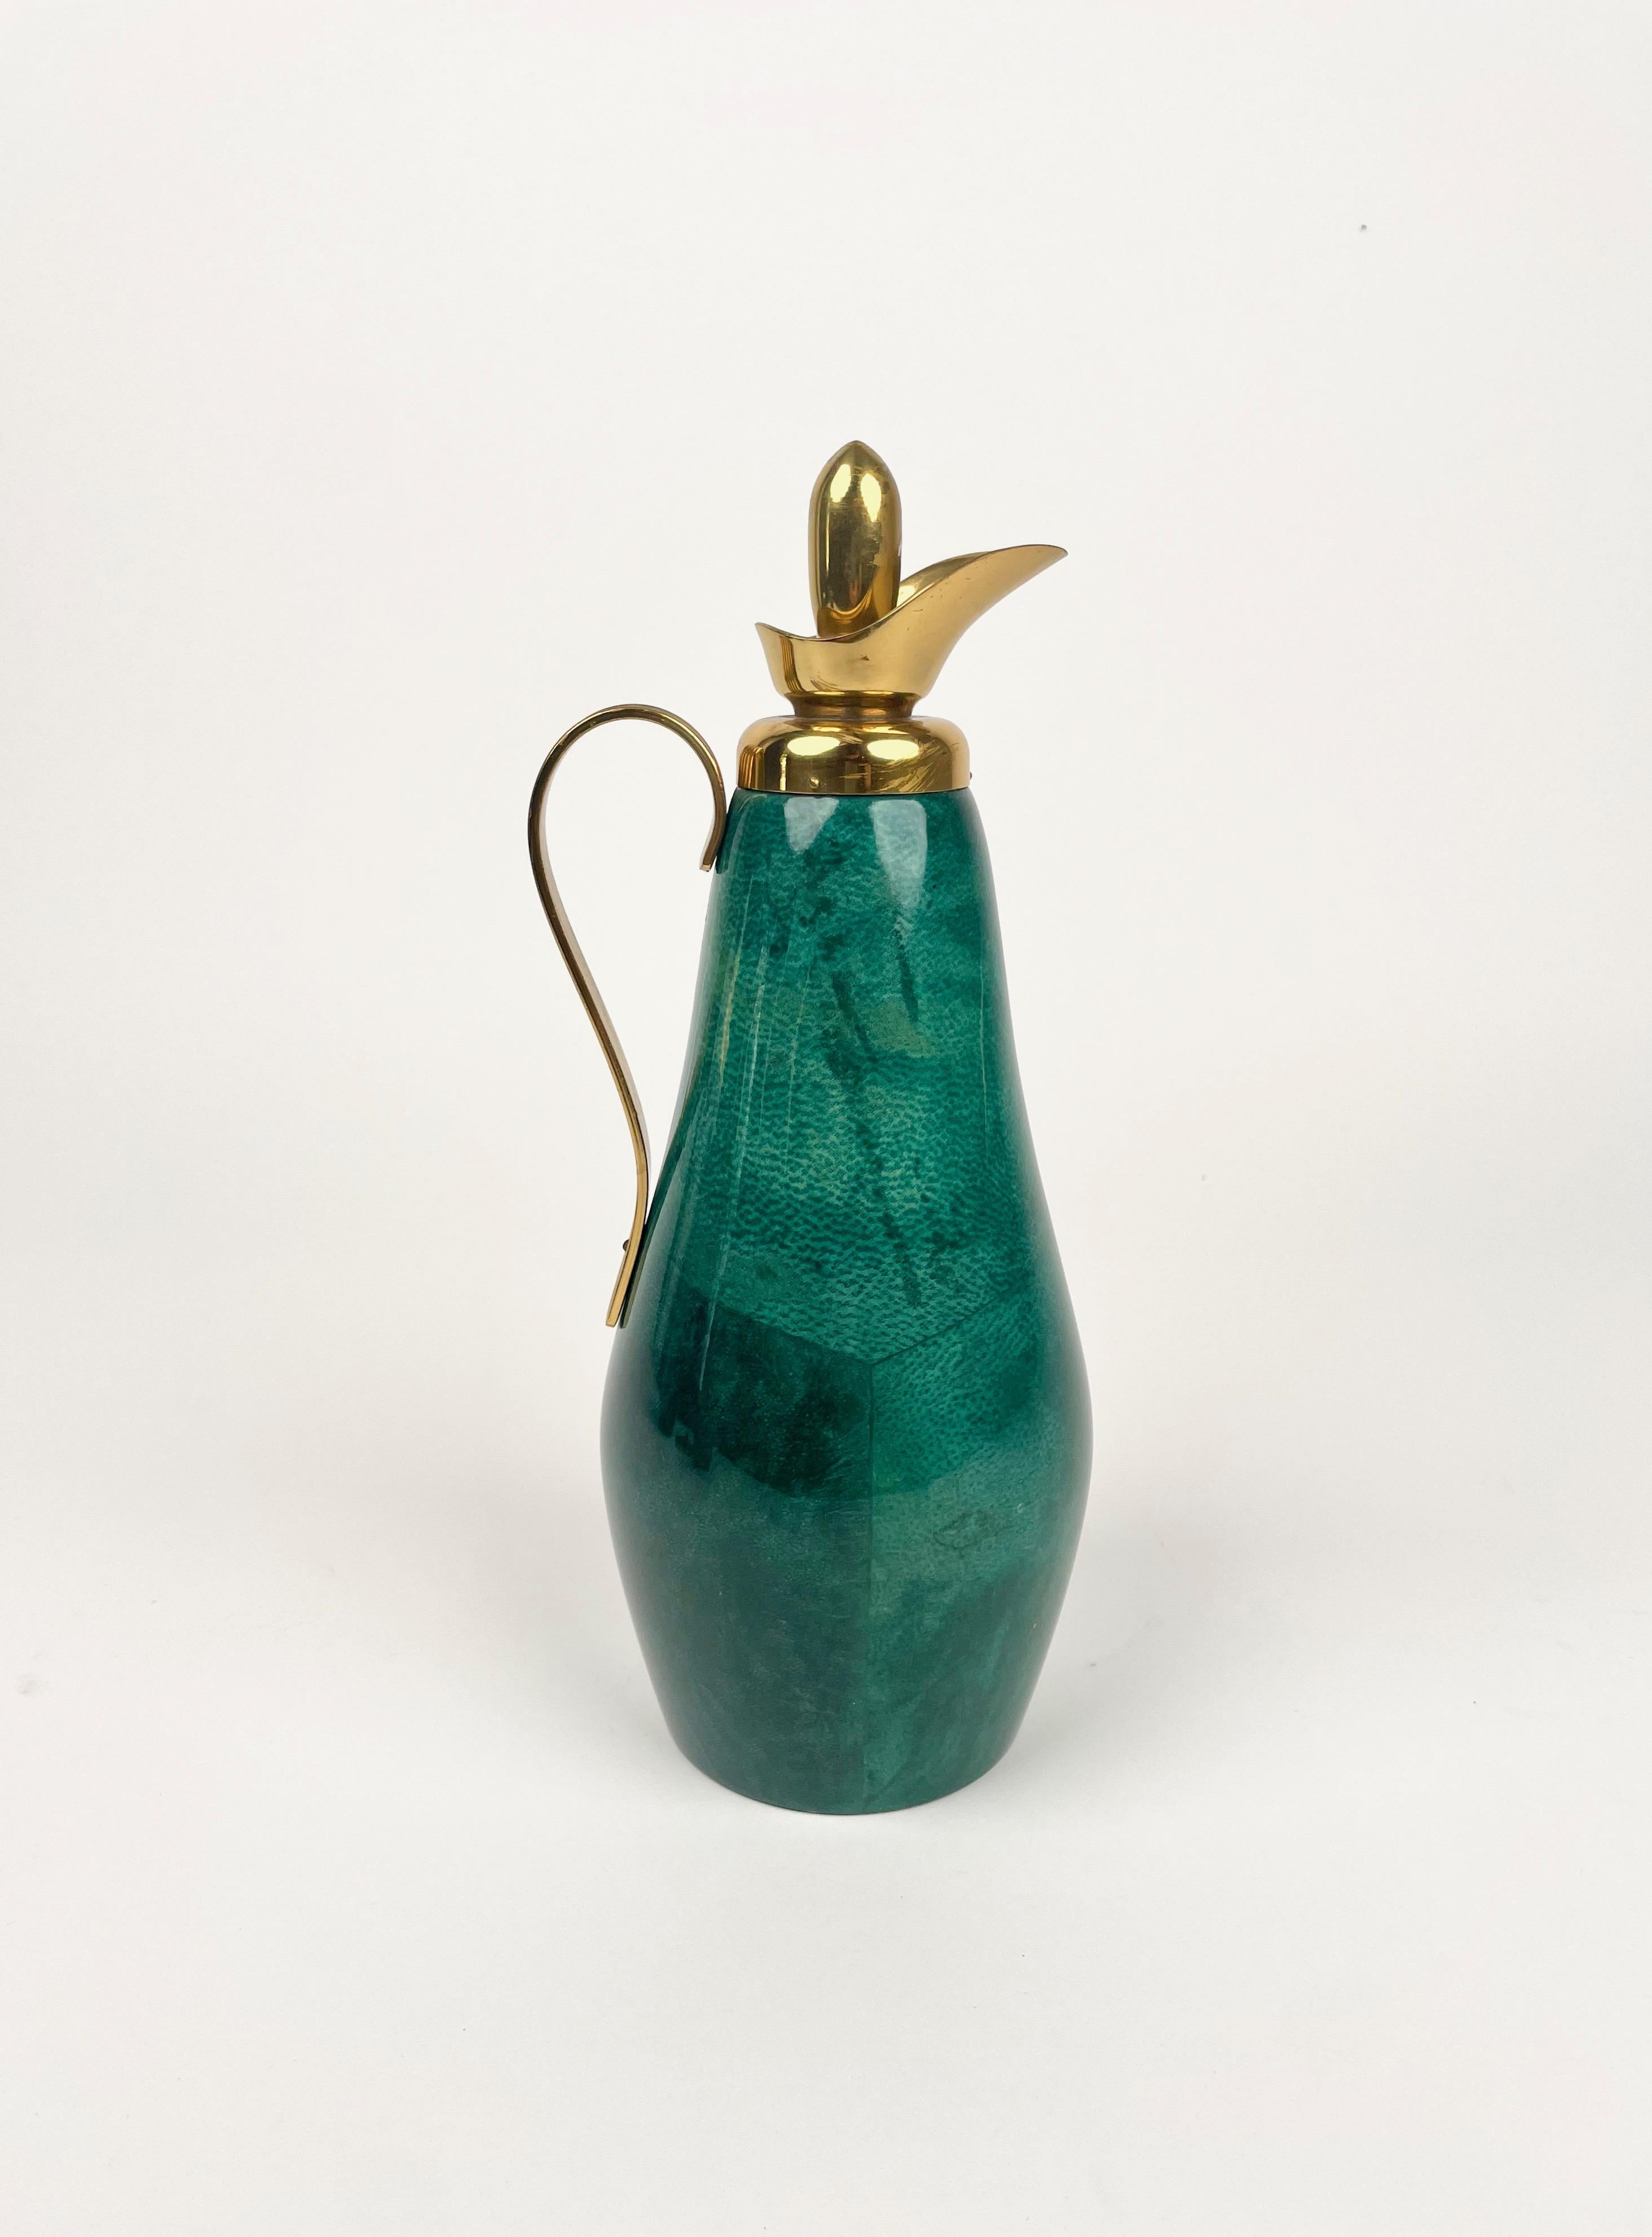 Mid-20th Century Set Barware Bar Green Goatskin and Brass by Aldo Tura for Macabo, Italy 1960s For Sale